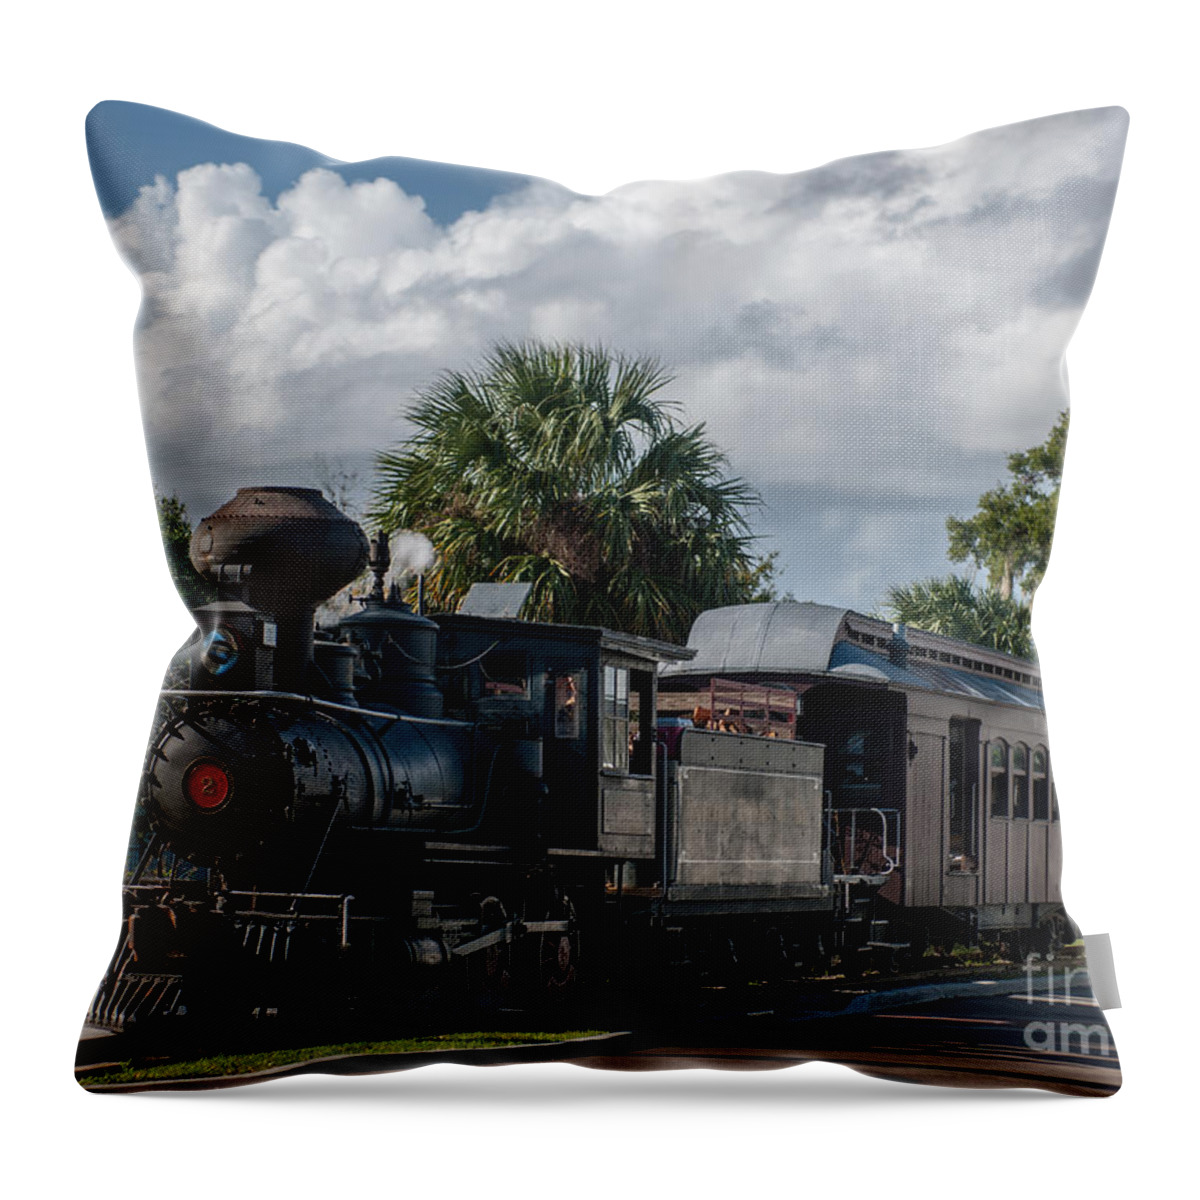 Orange Blossom Trail Throw Pillow featuring the photograph Orange Blossom Trail by Dale Powell